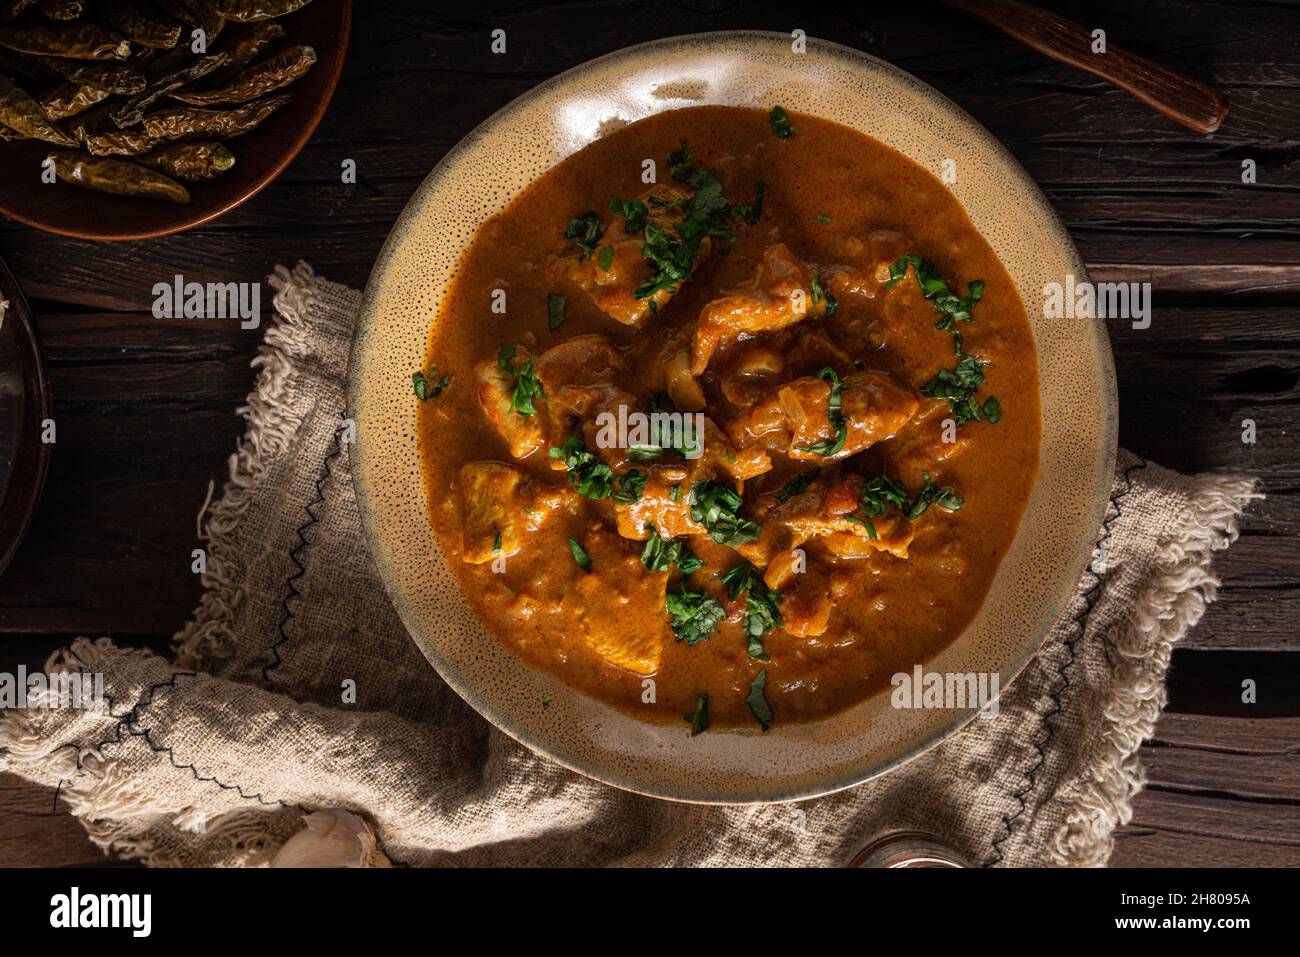 https://c8.alamy.com/comp/2H8095A/original-chicken-curry-with-spicy-jalapeno-peppers-2H8095A.jpg